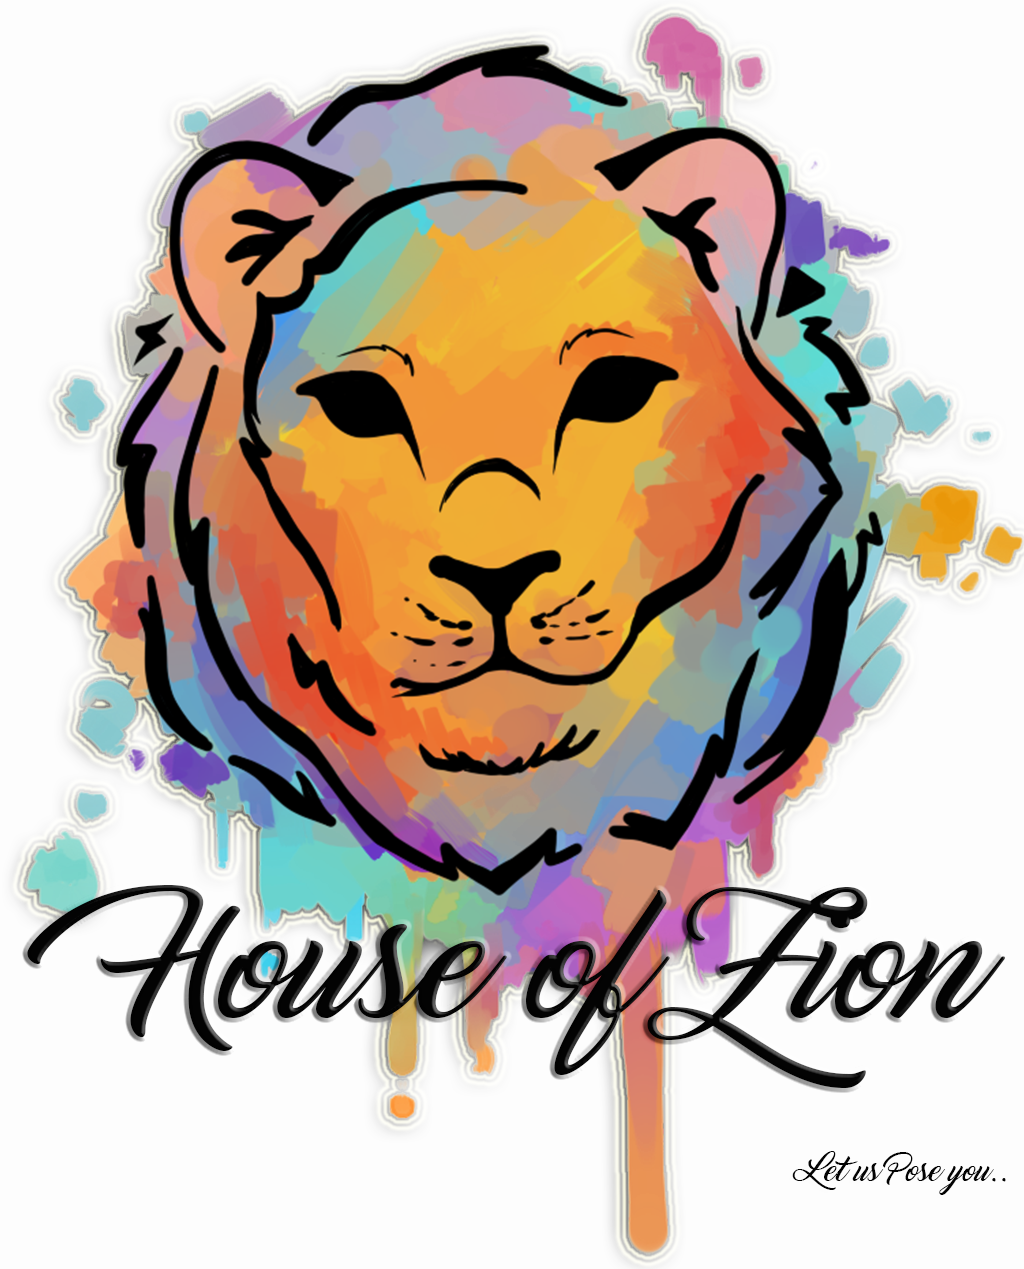 House of Zion